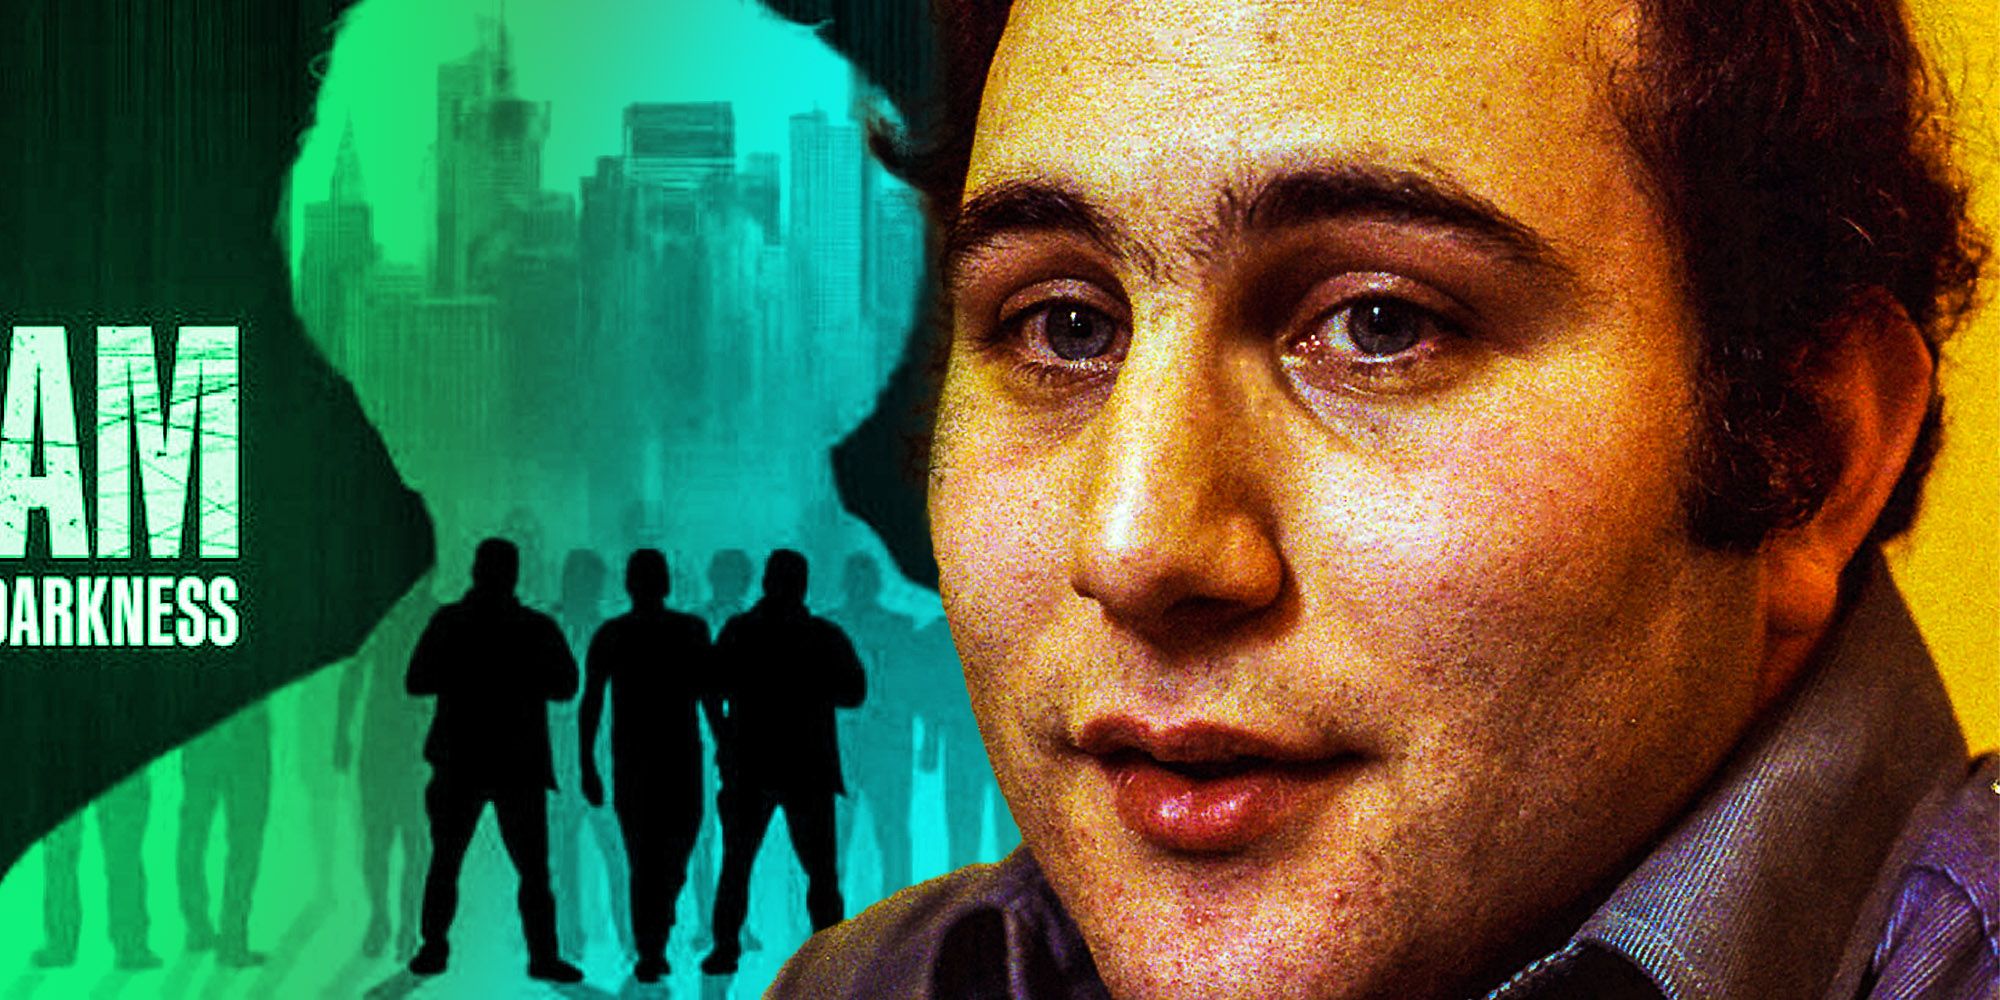 Sons of Sam What The Netflix Documentary Leaves Out About David Berkowitz